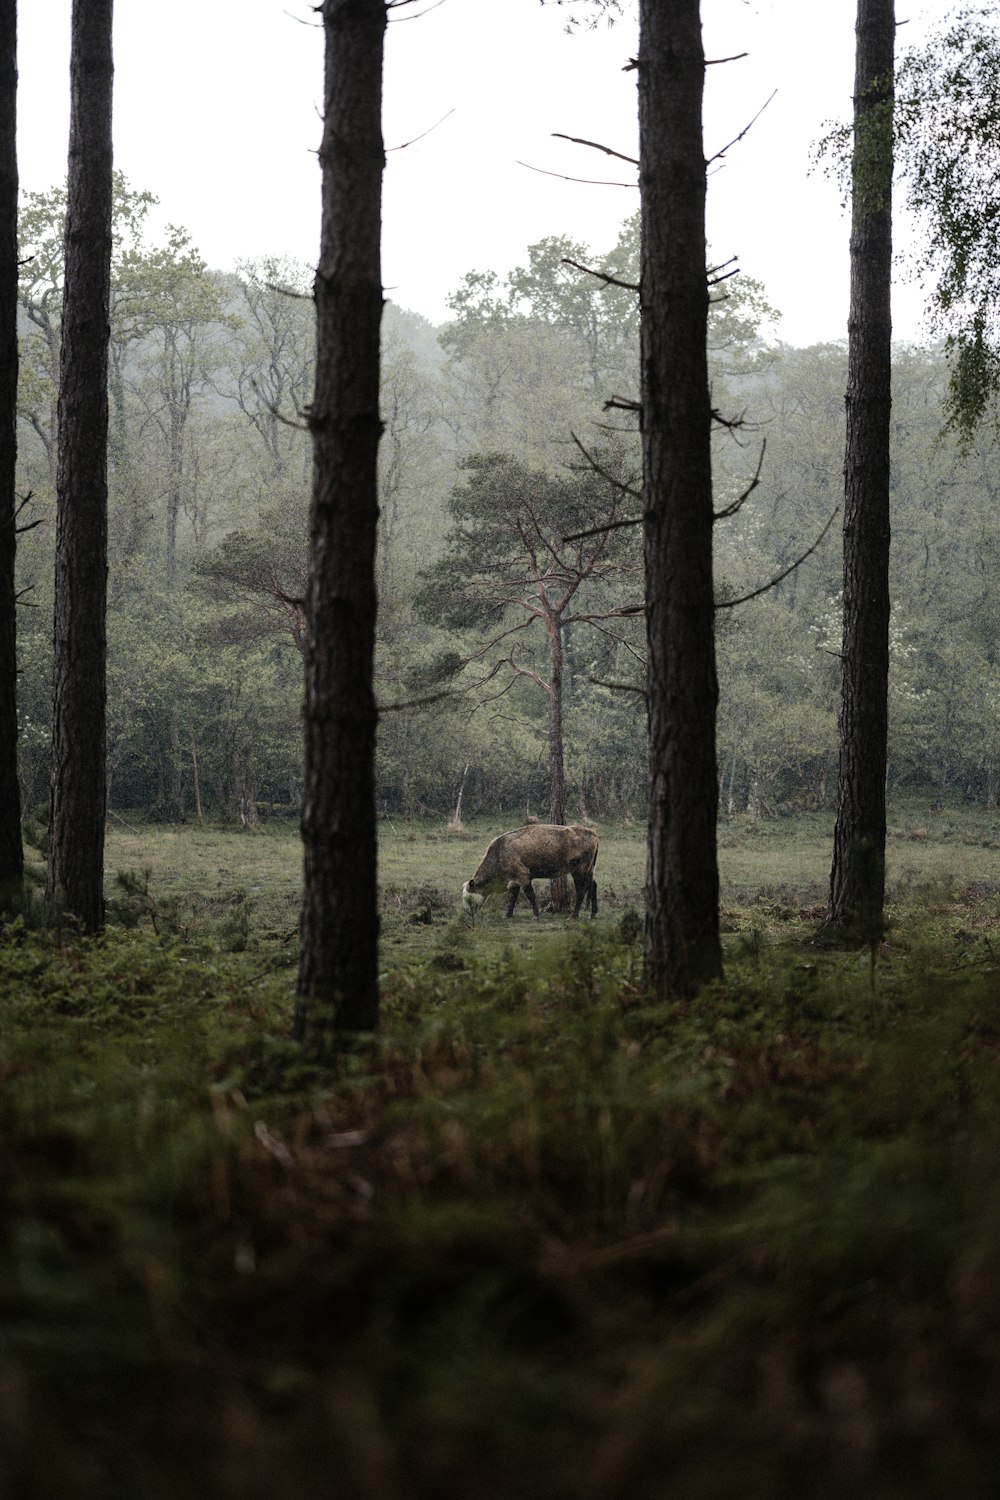 a cow grazing in a forest with tall trees